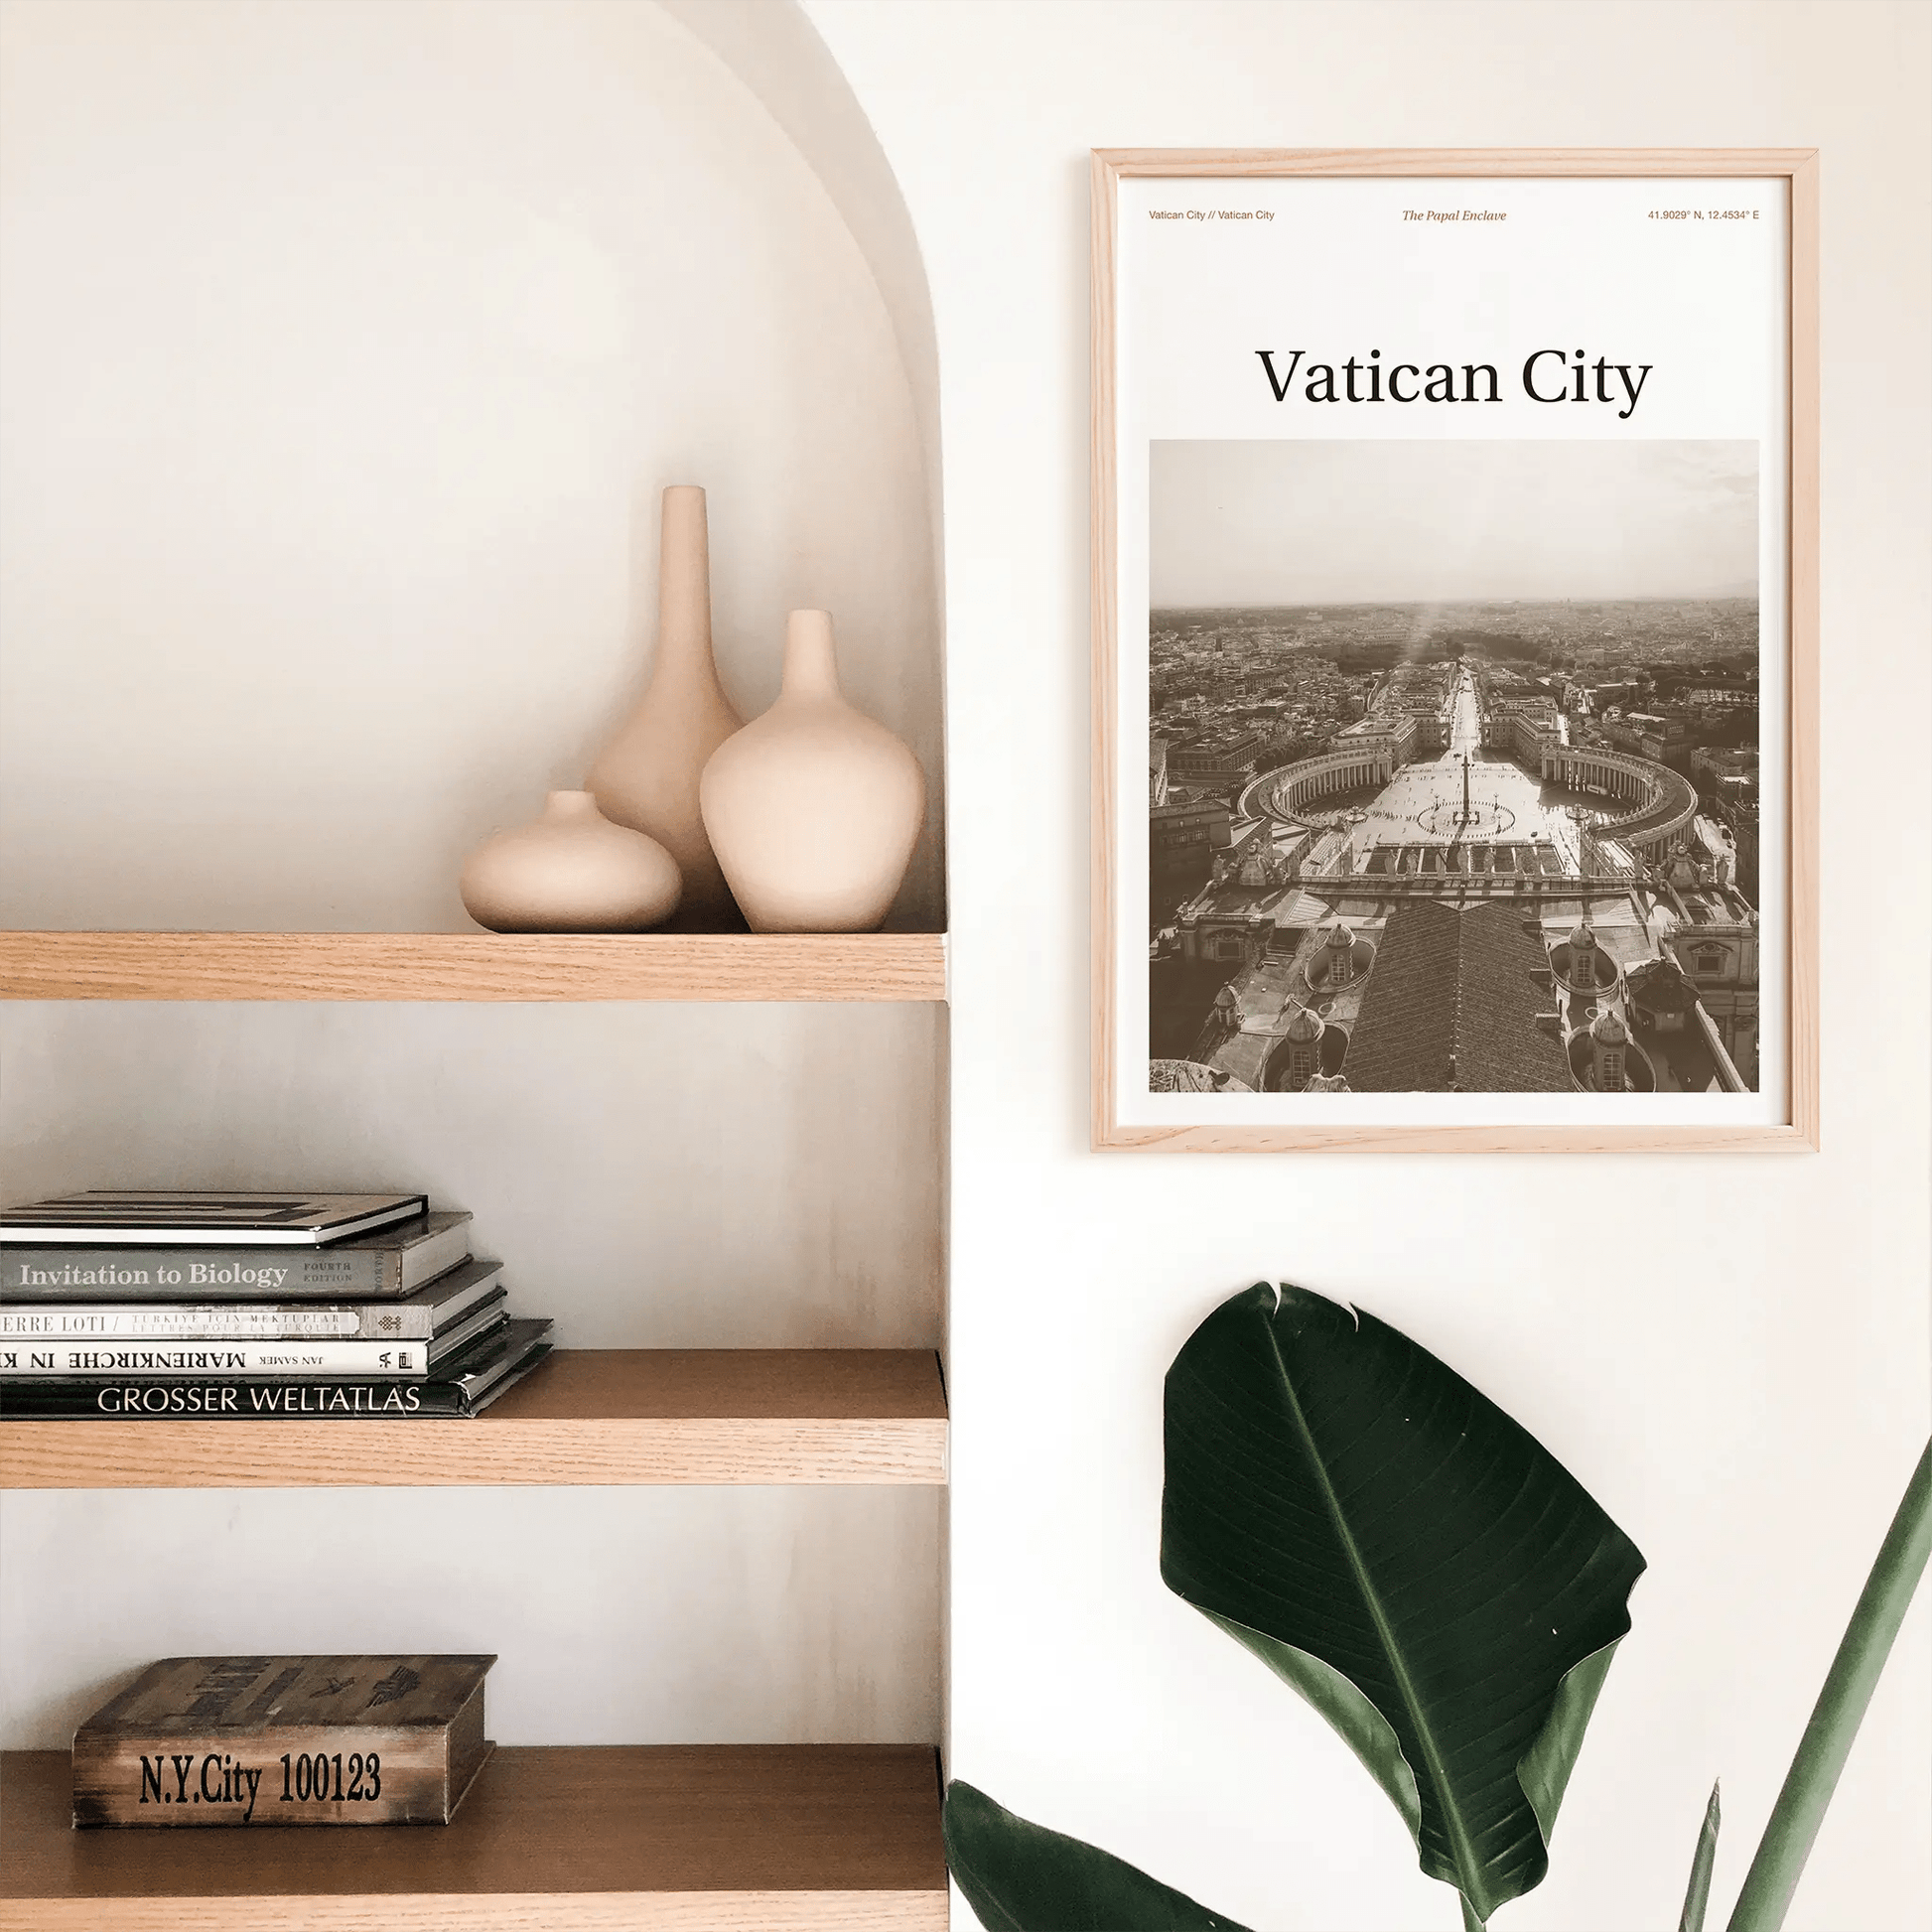 Vatican City Essence Poster - The Globe Gallery